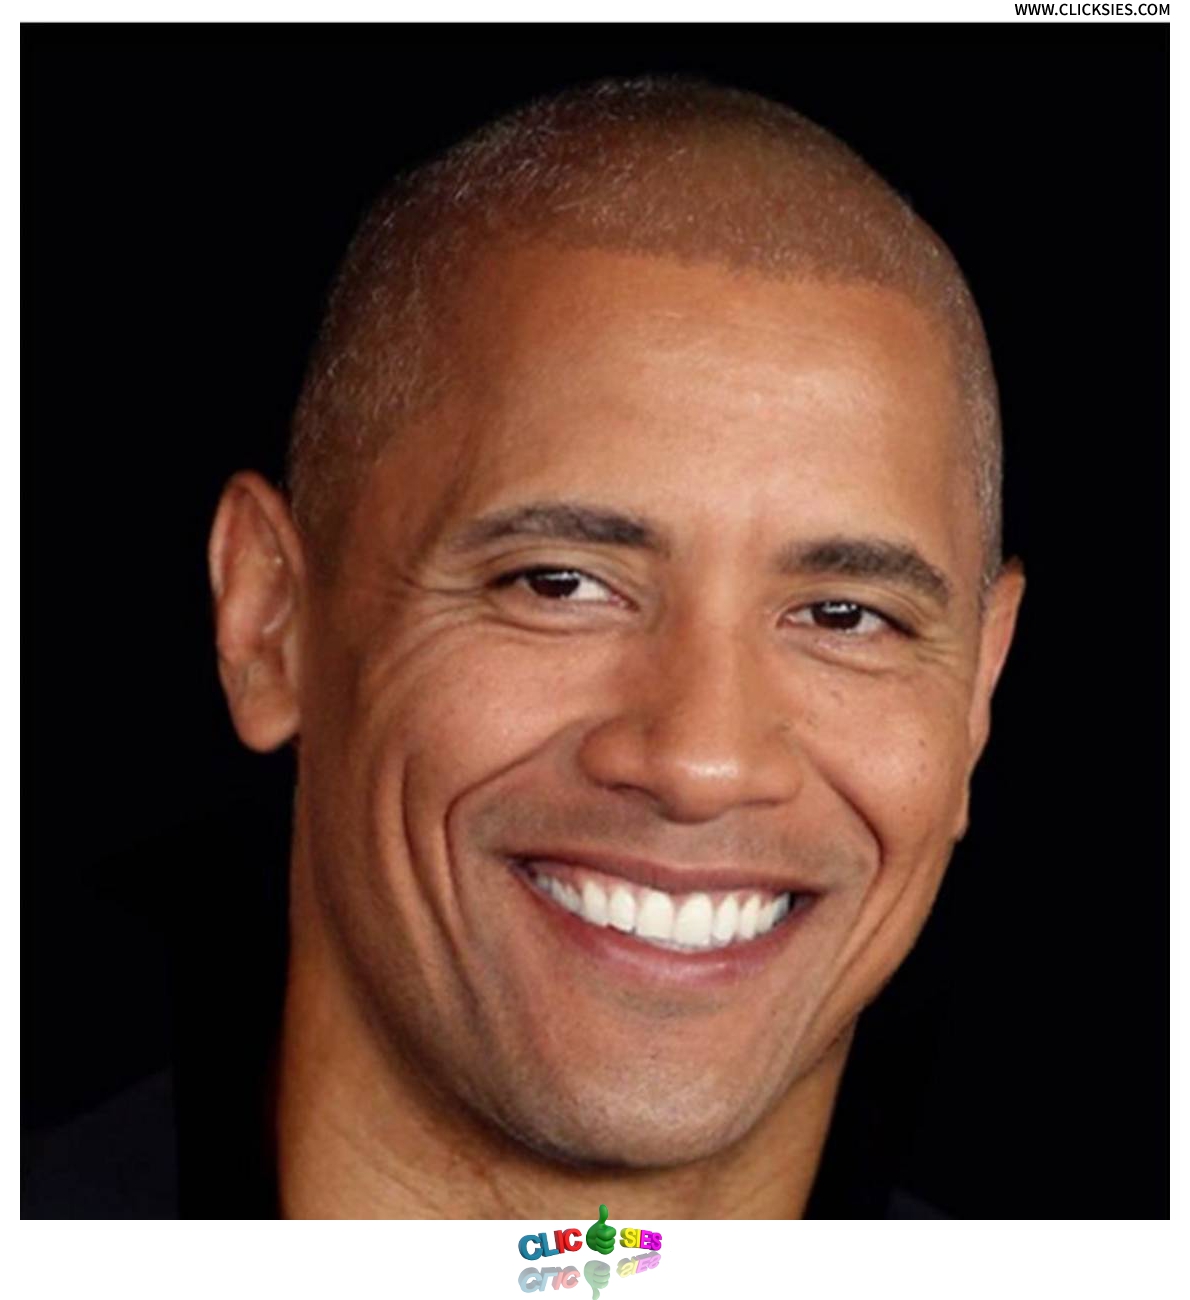 Height of Photoshop-The Rock Obama - www.clicksies.com